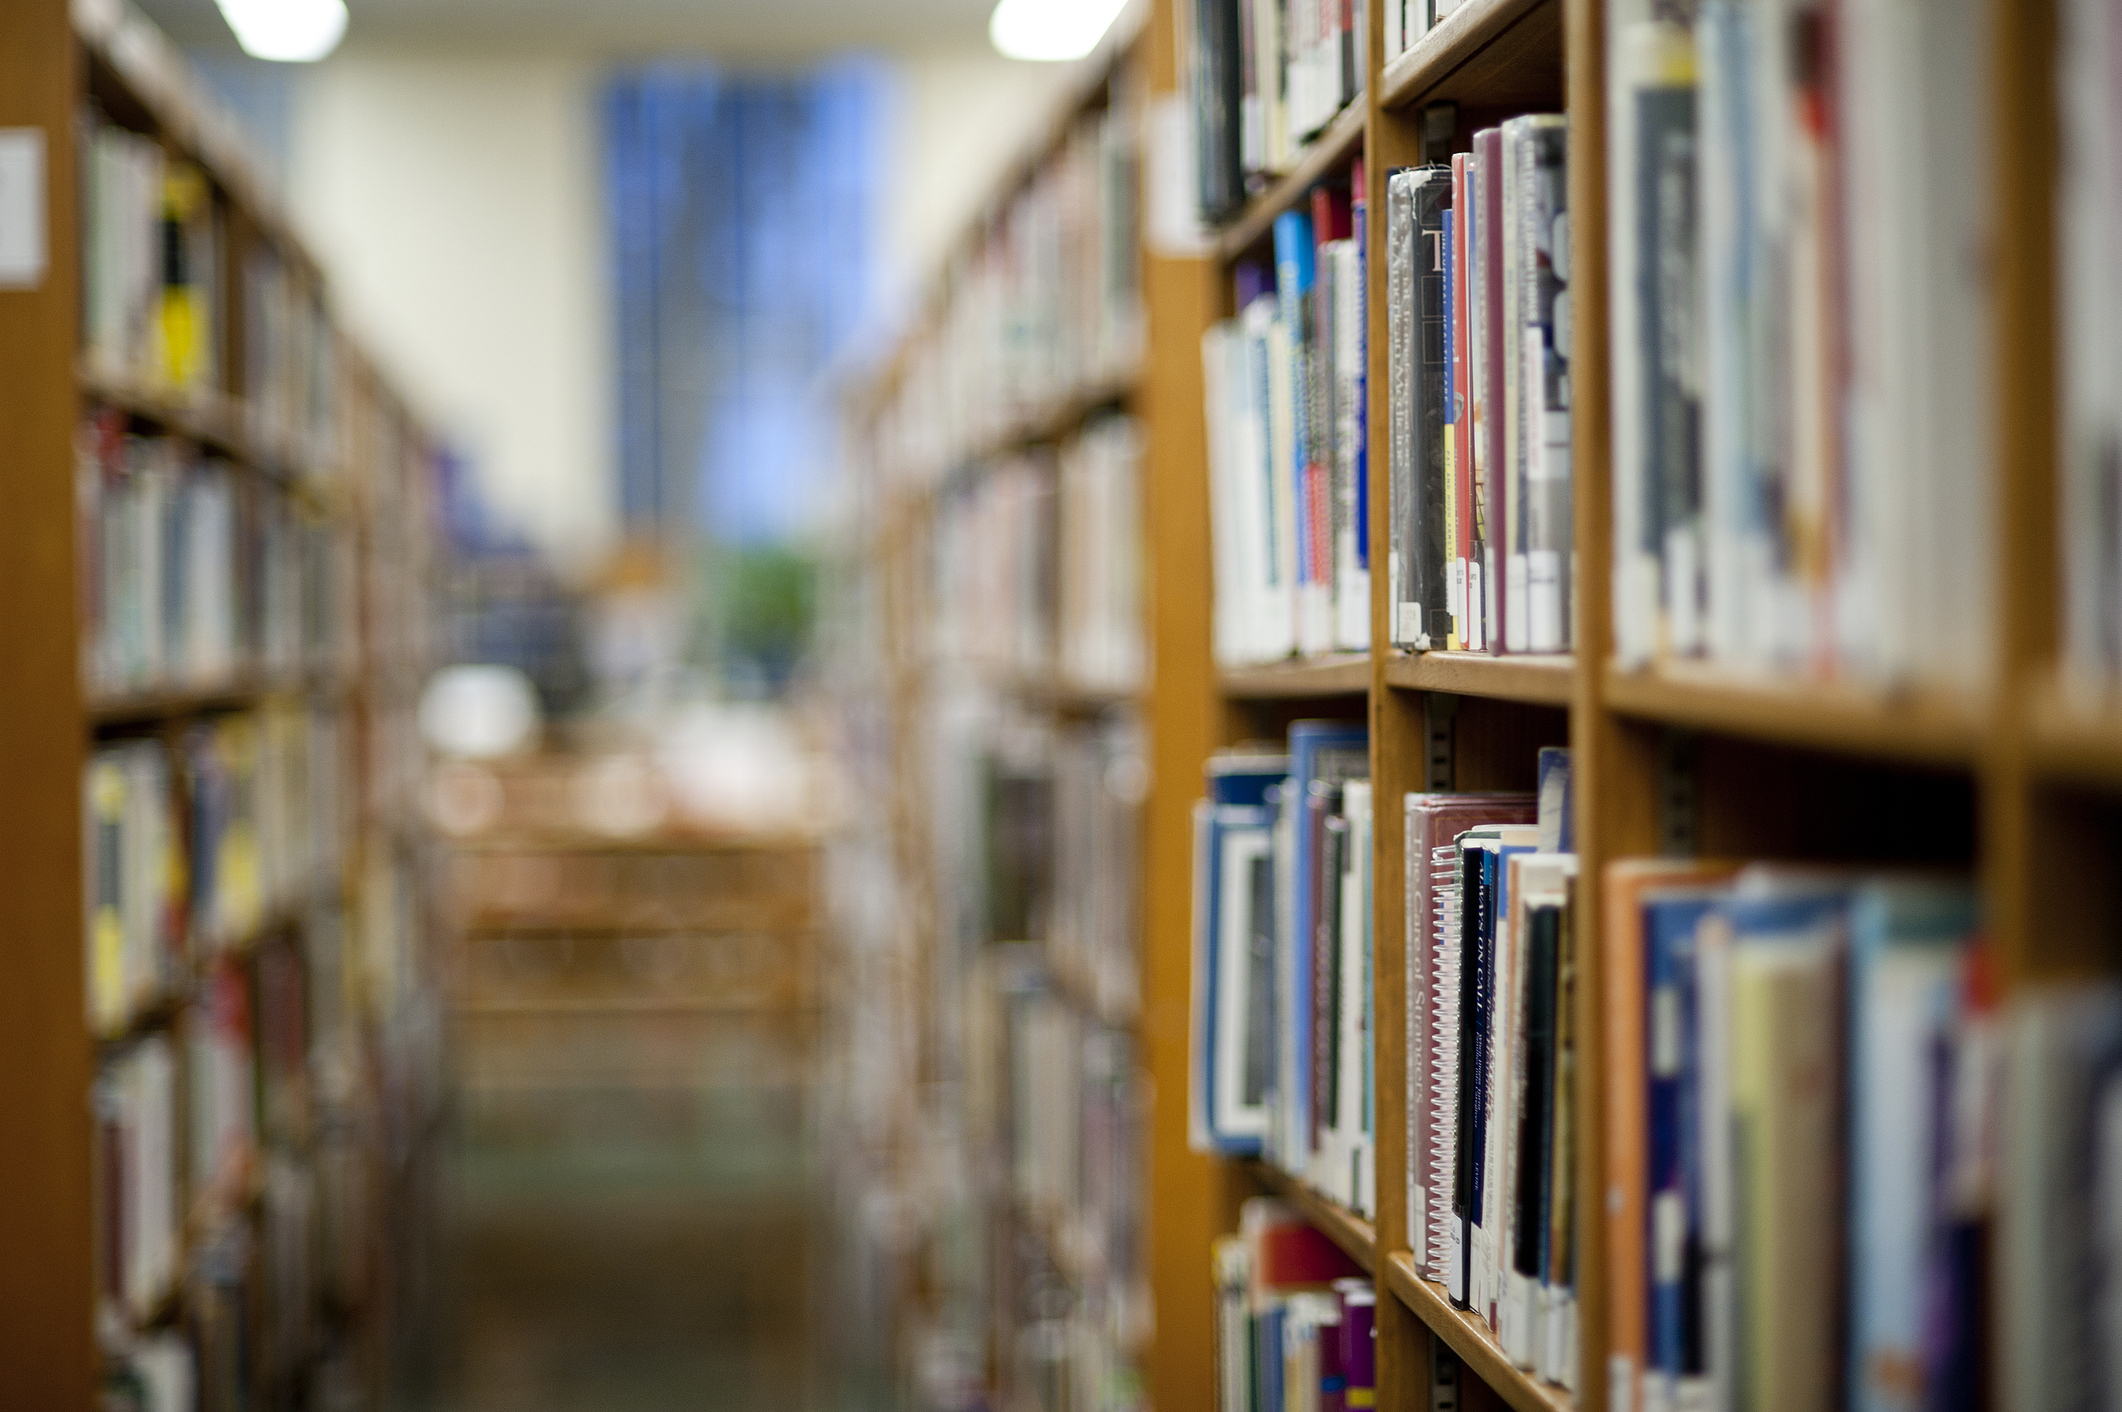 Aisles of bookshelves in a library, focus on books in the foreground with blurred background